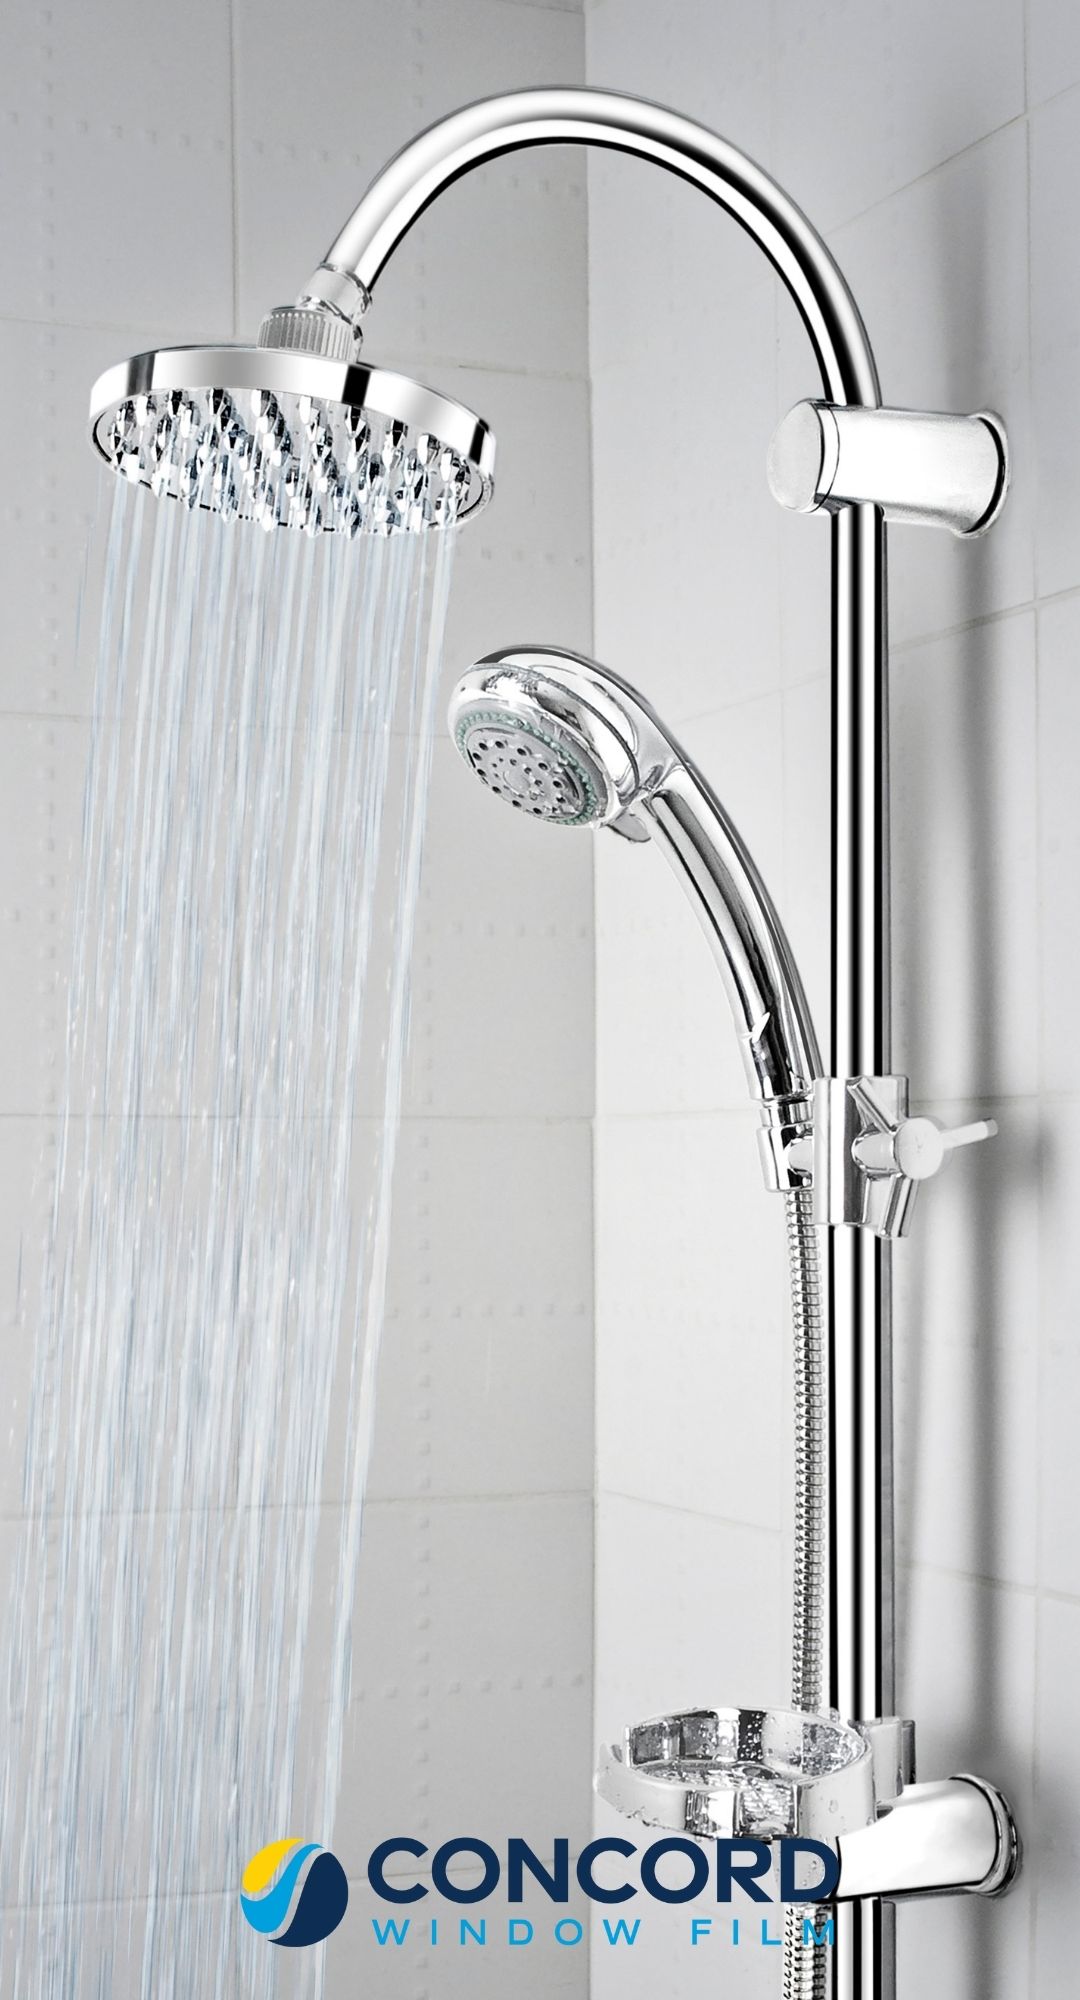 Photo of a low flow shower head